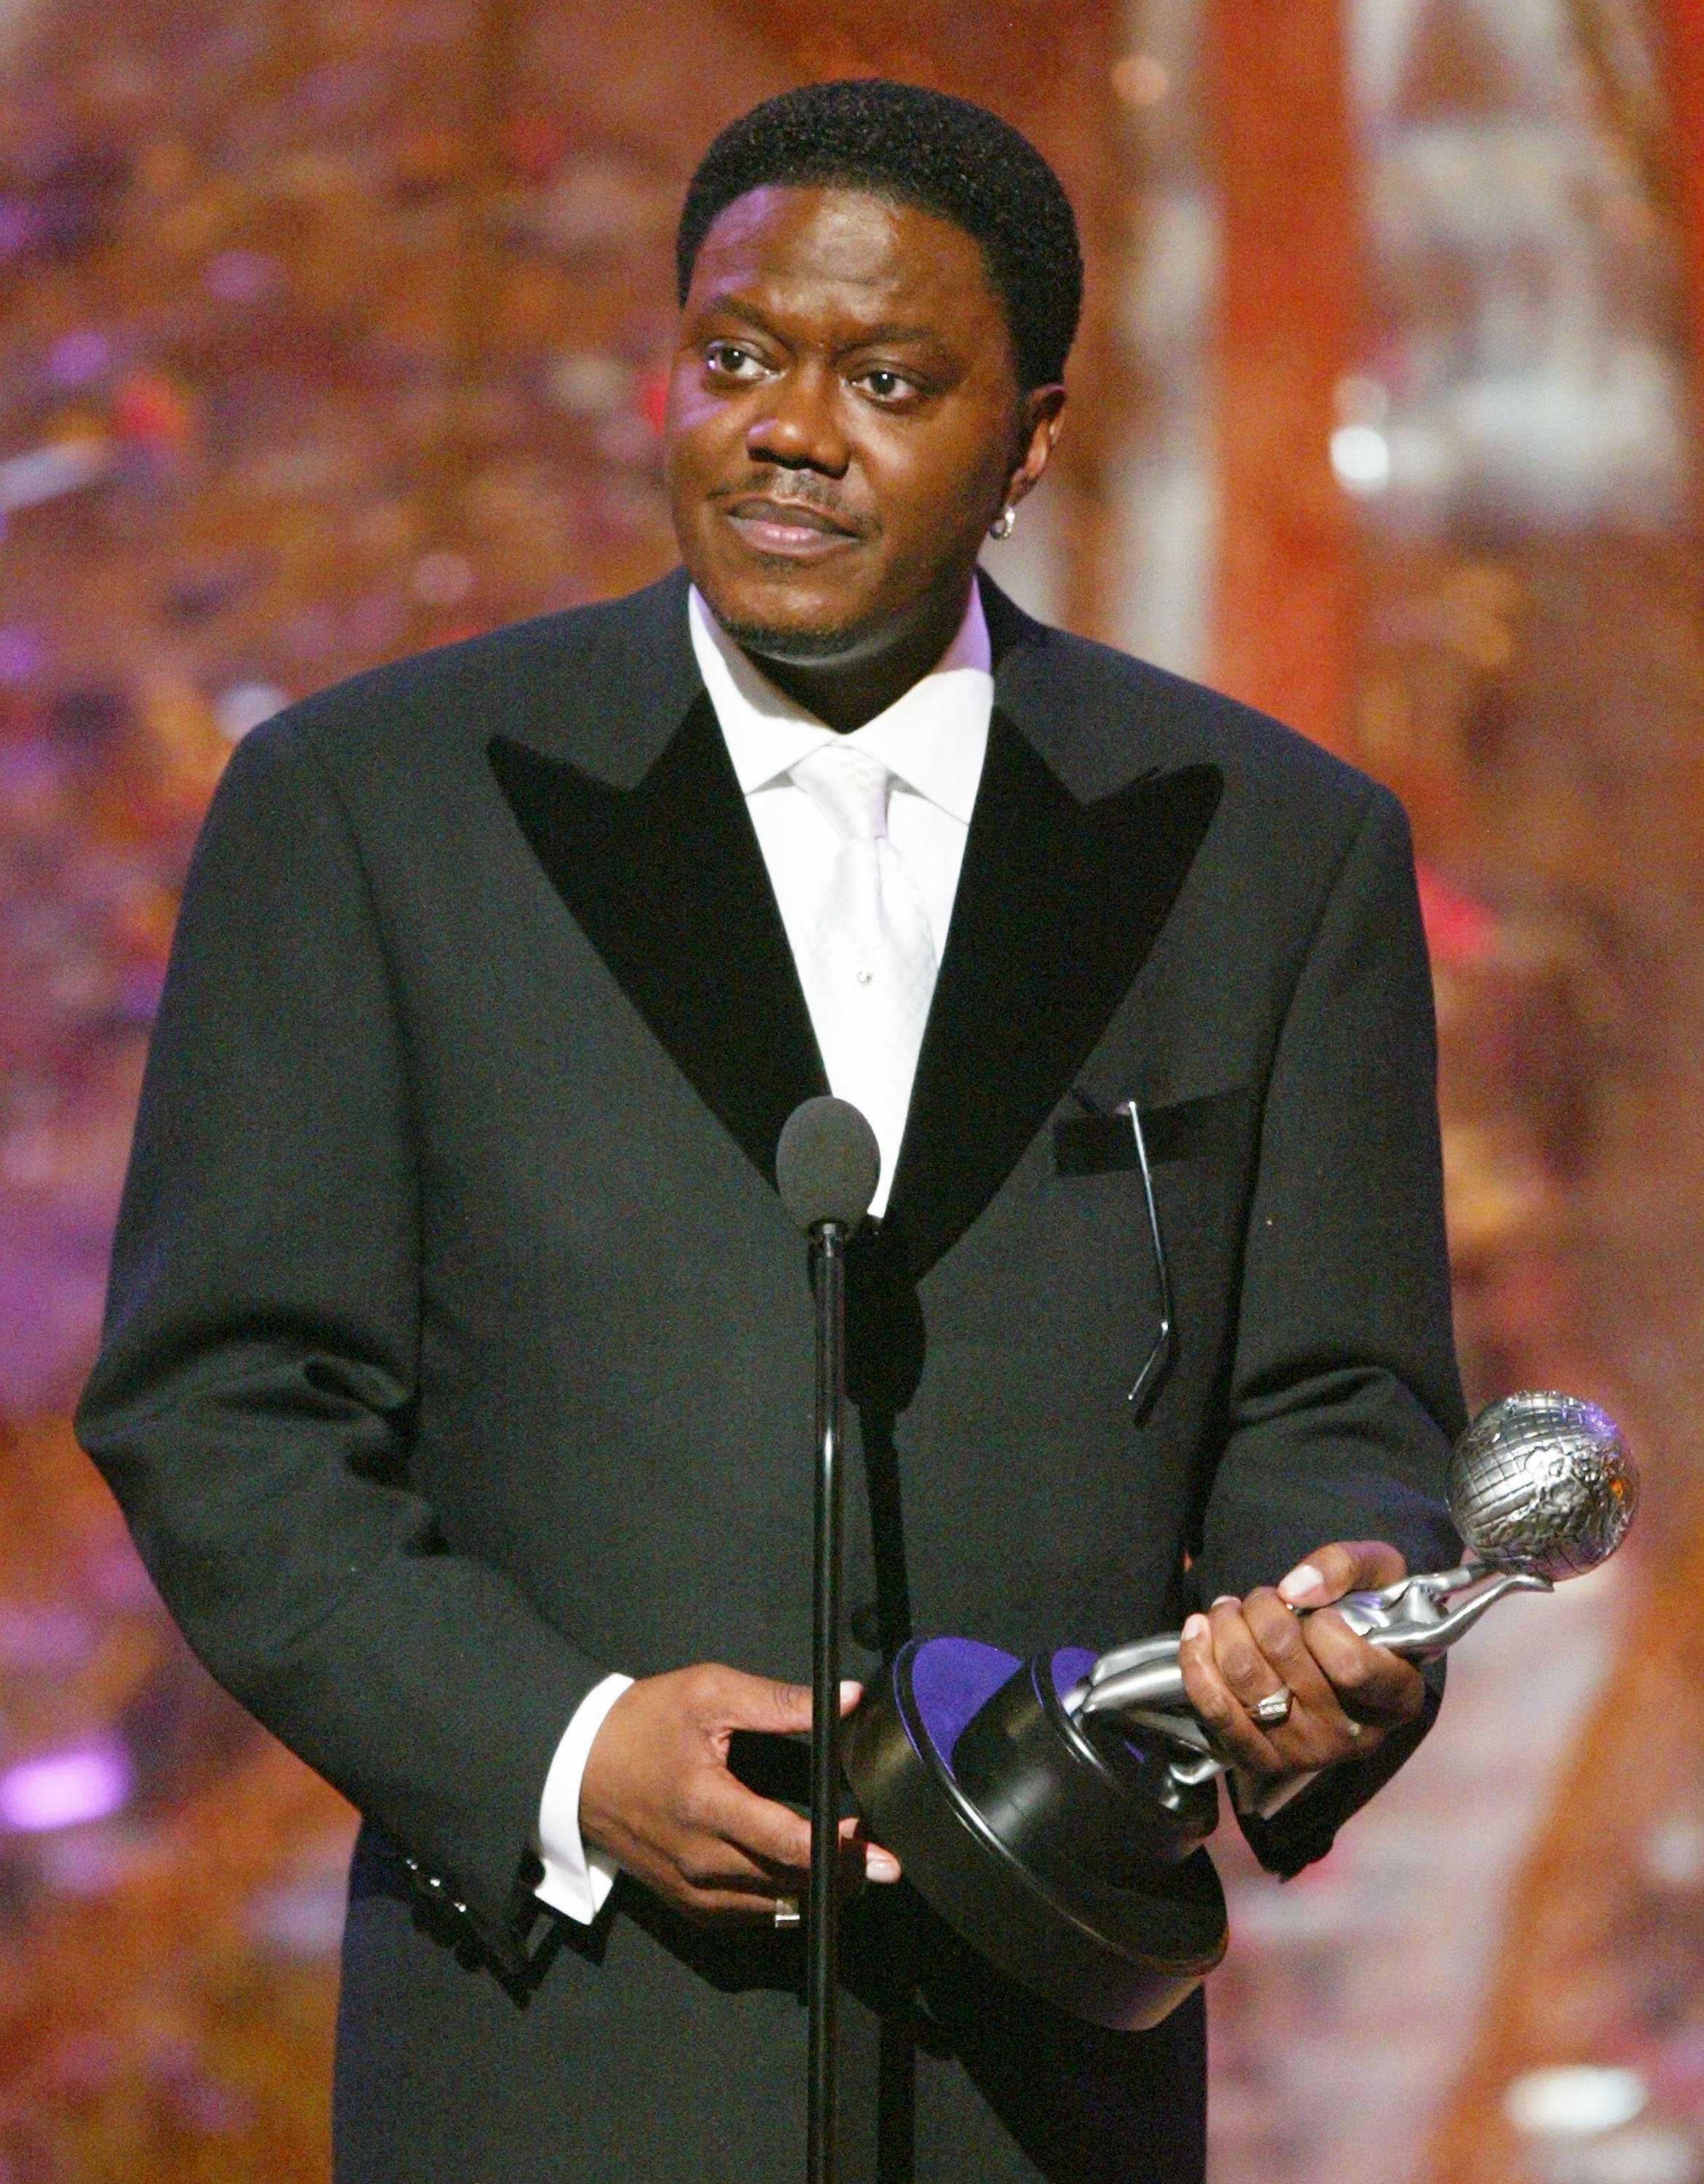 Bernie Mac accepting his award for Best Actor in a Comedy Series on stage at the 35th Annual NAACP Image Awards. | Photo: GettyImages